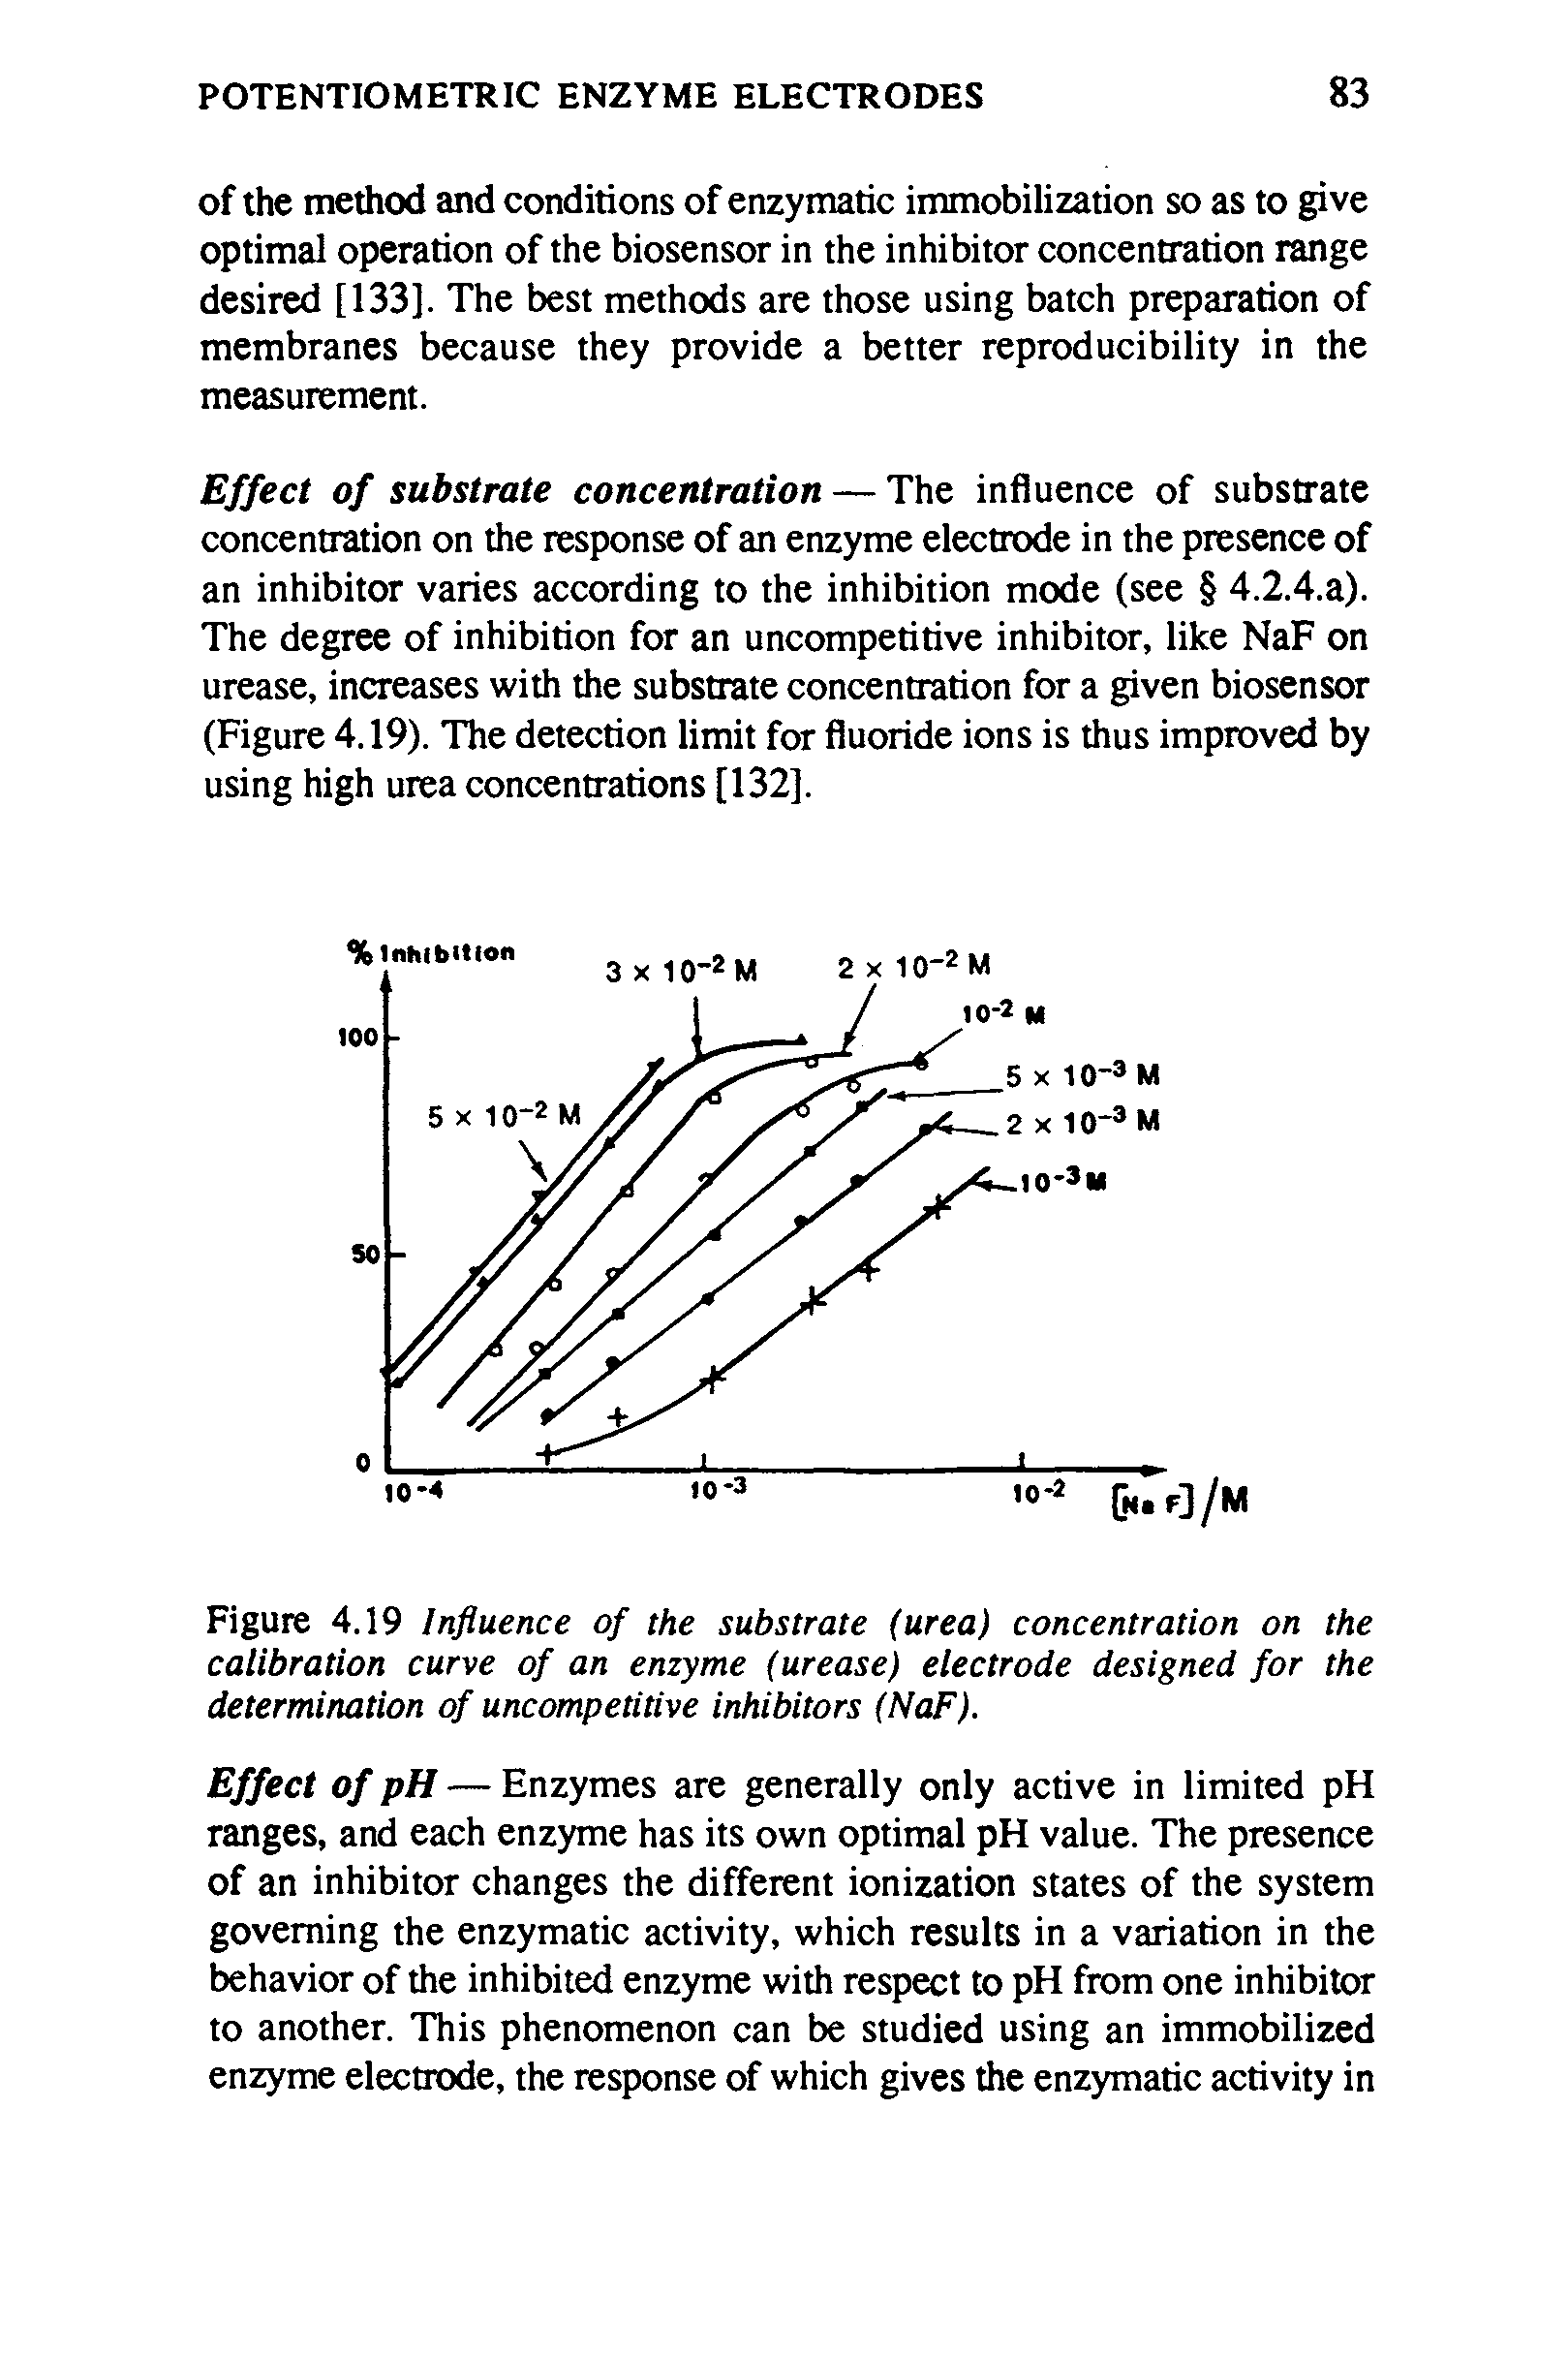 Figure 4.19 Influence of the substrate (urea) concentration on the calibration curve of an enzyme (urease) electrode designed for the determination of uncompetitive inhibitors (NaF).